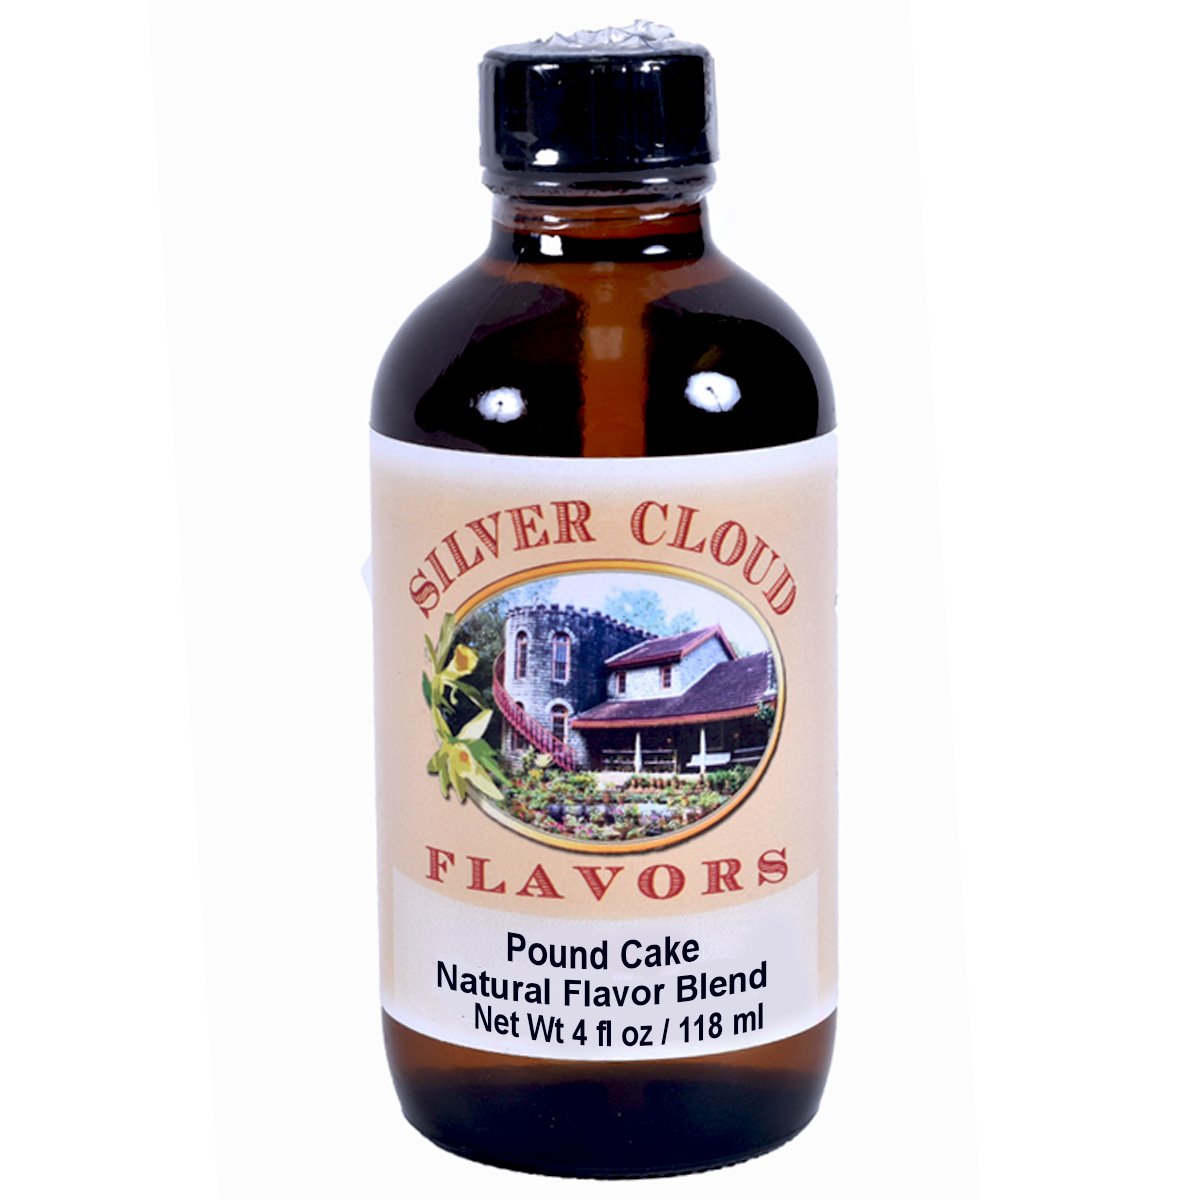 Pound Cake, Natural Flavor Blend Silver Cloud Extract - Bake Supply Plus